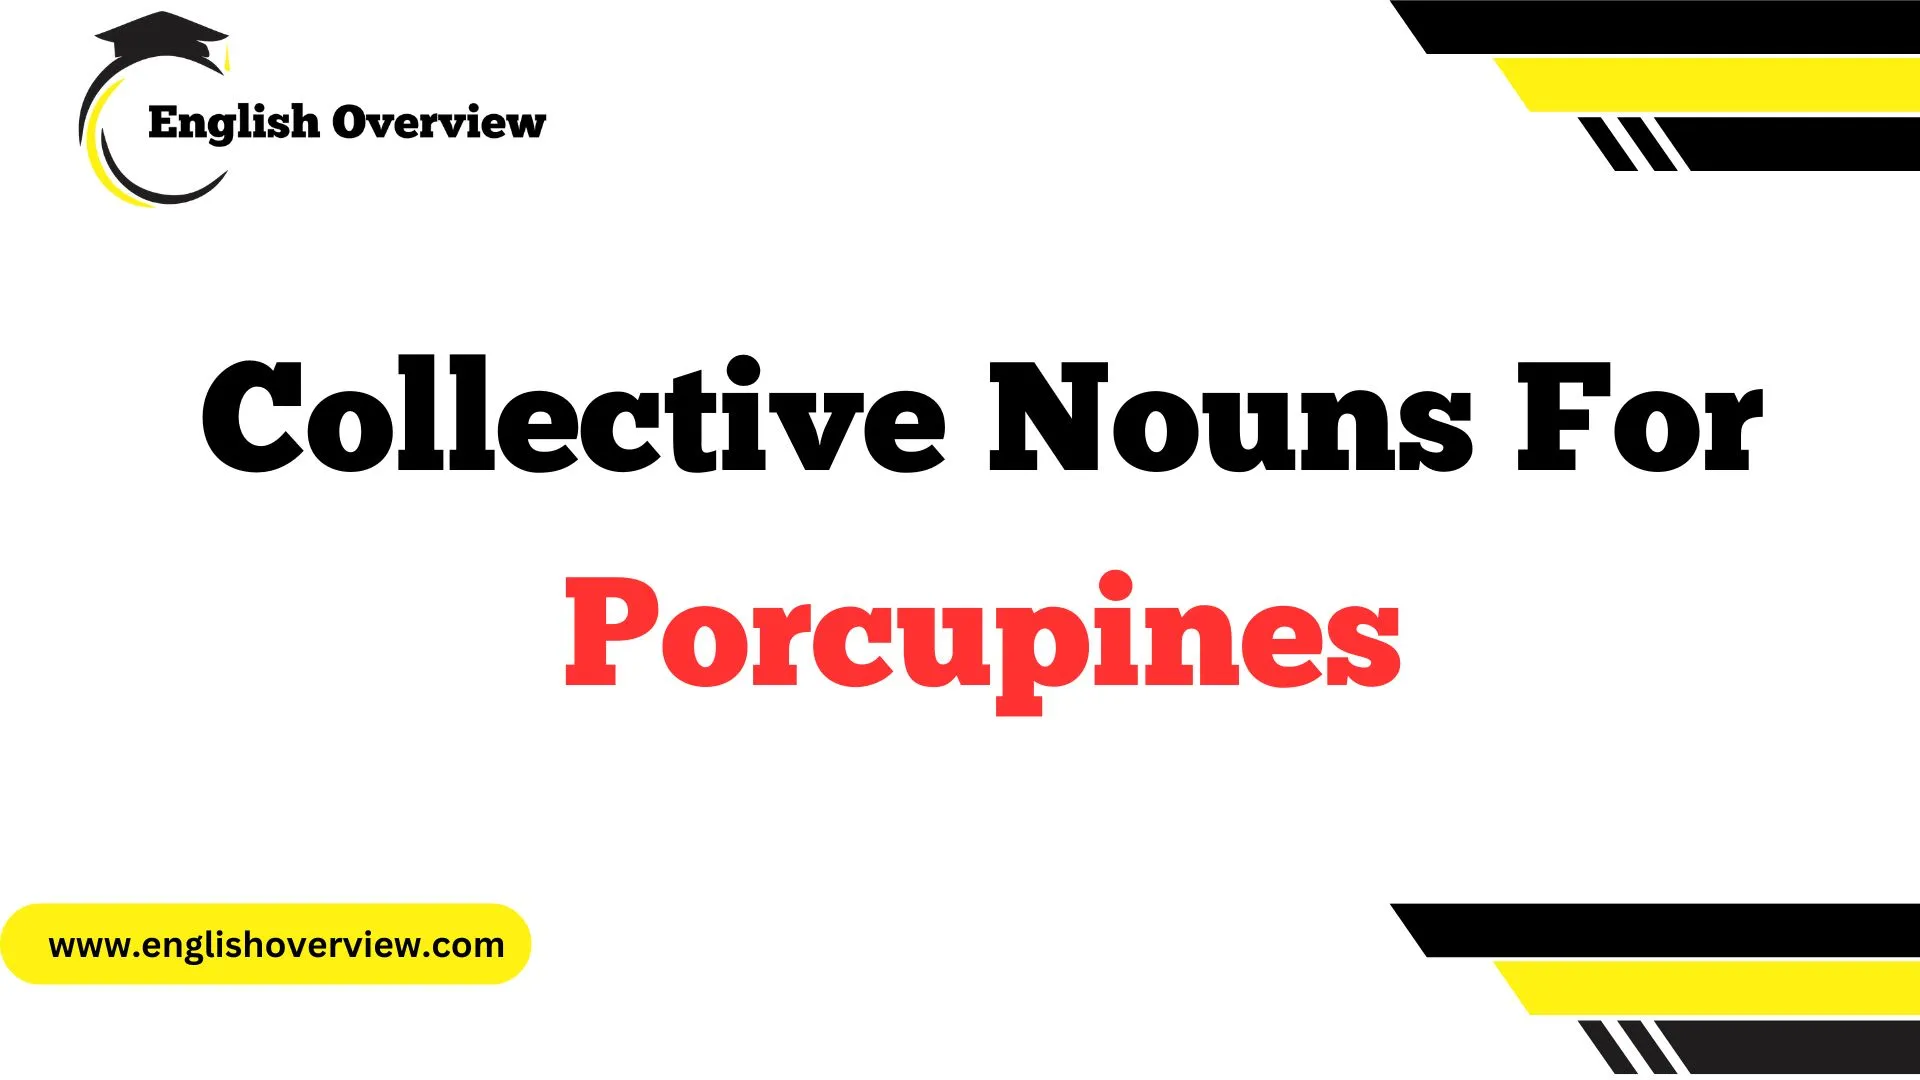 Collective Nouns For Porcupines